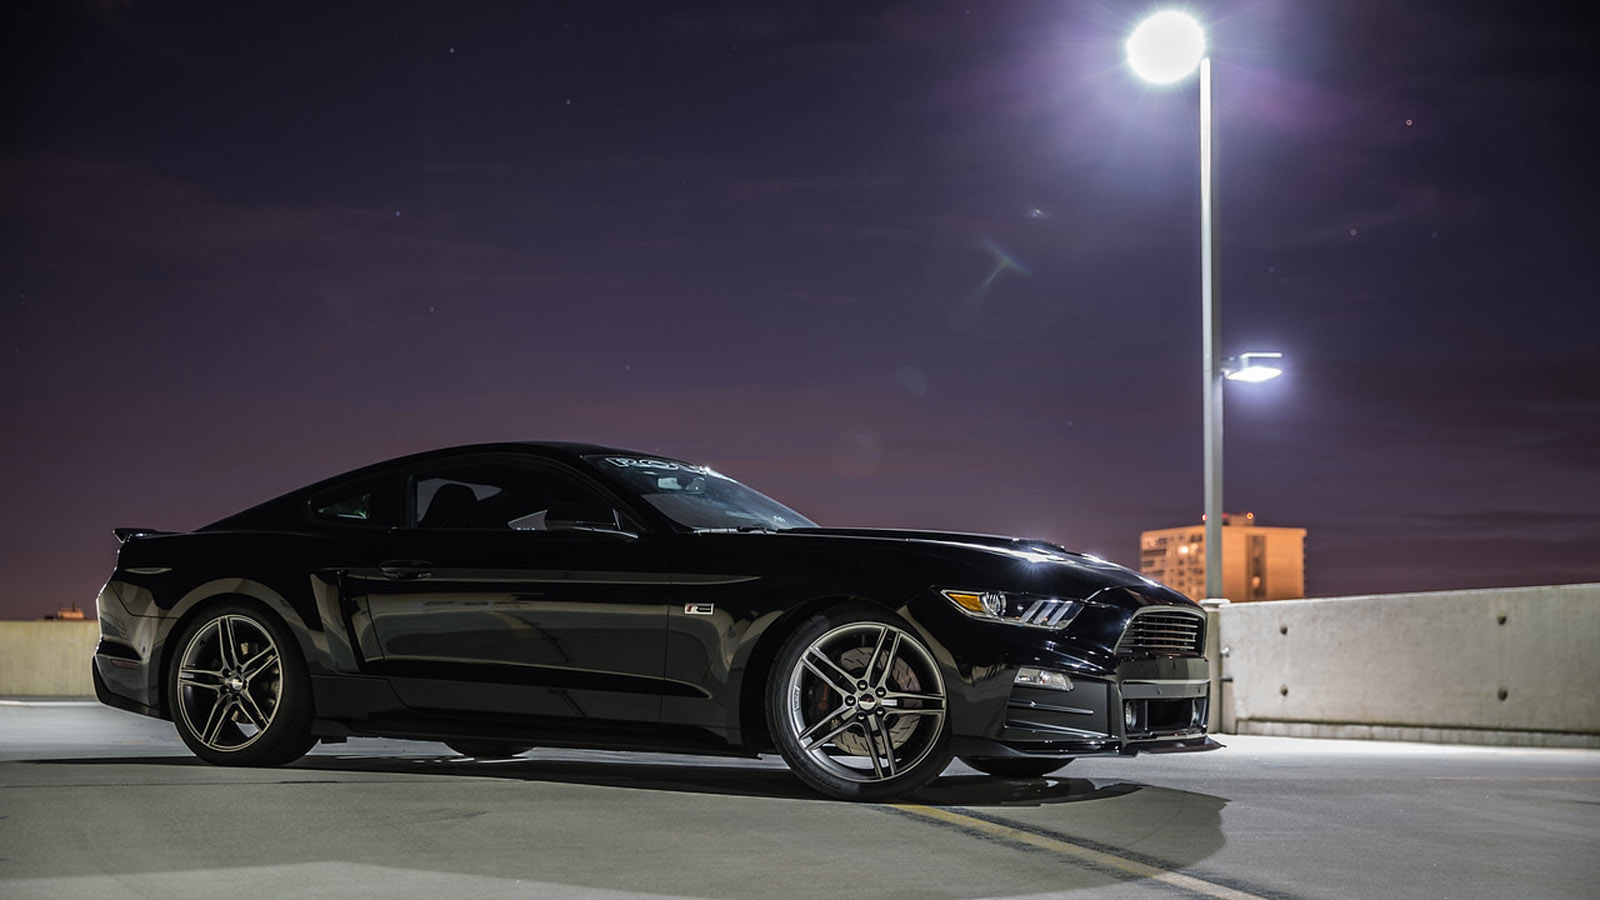 Ford Mustang 2015 Roush Performance